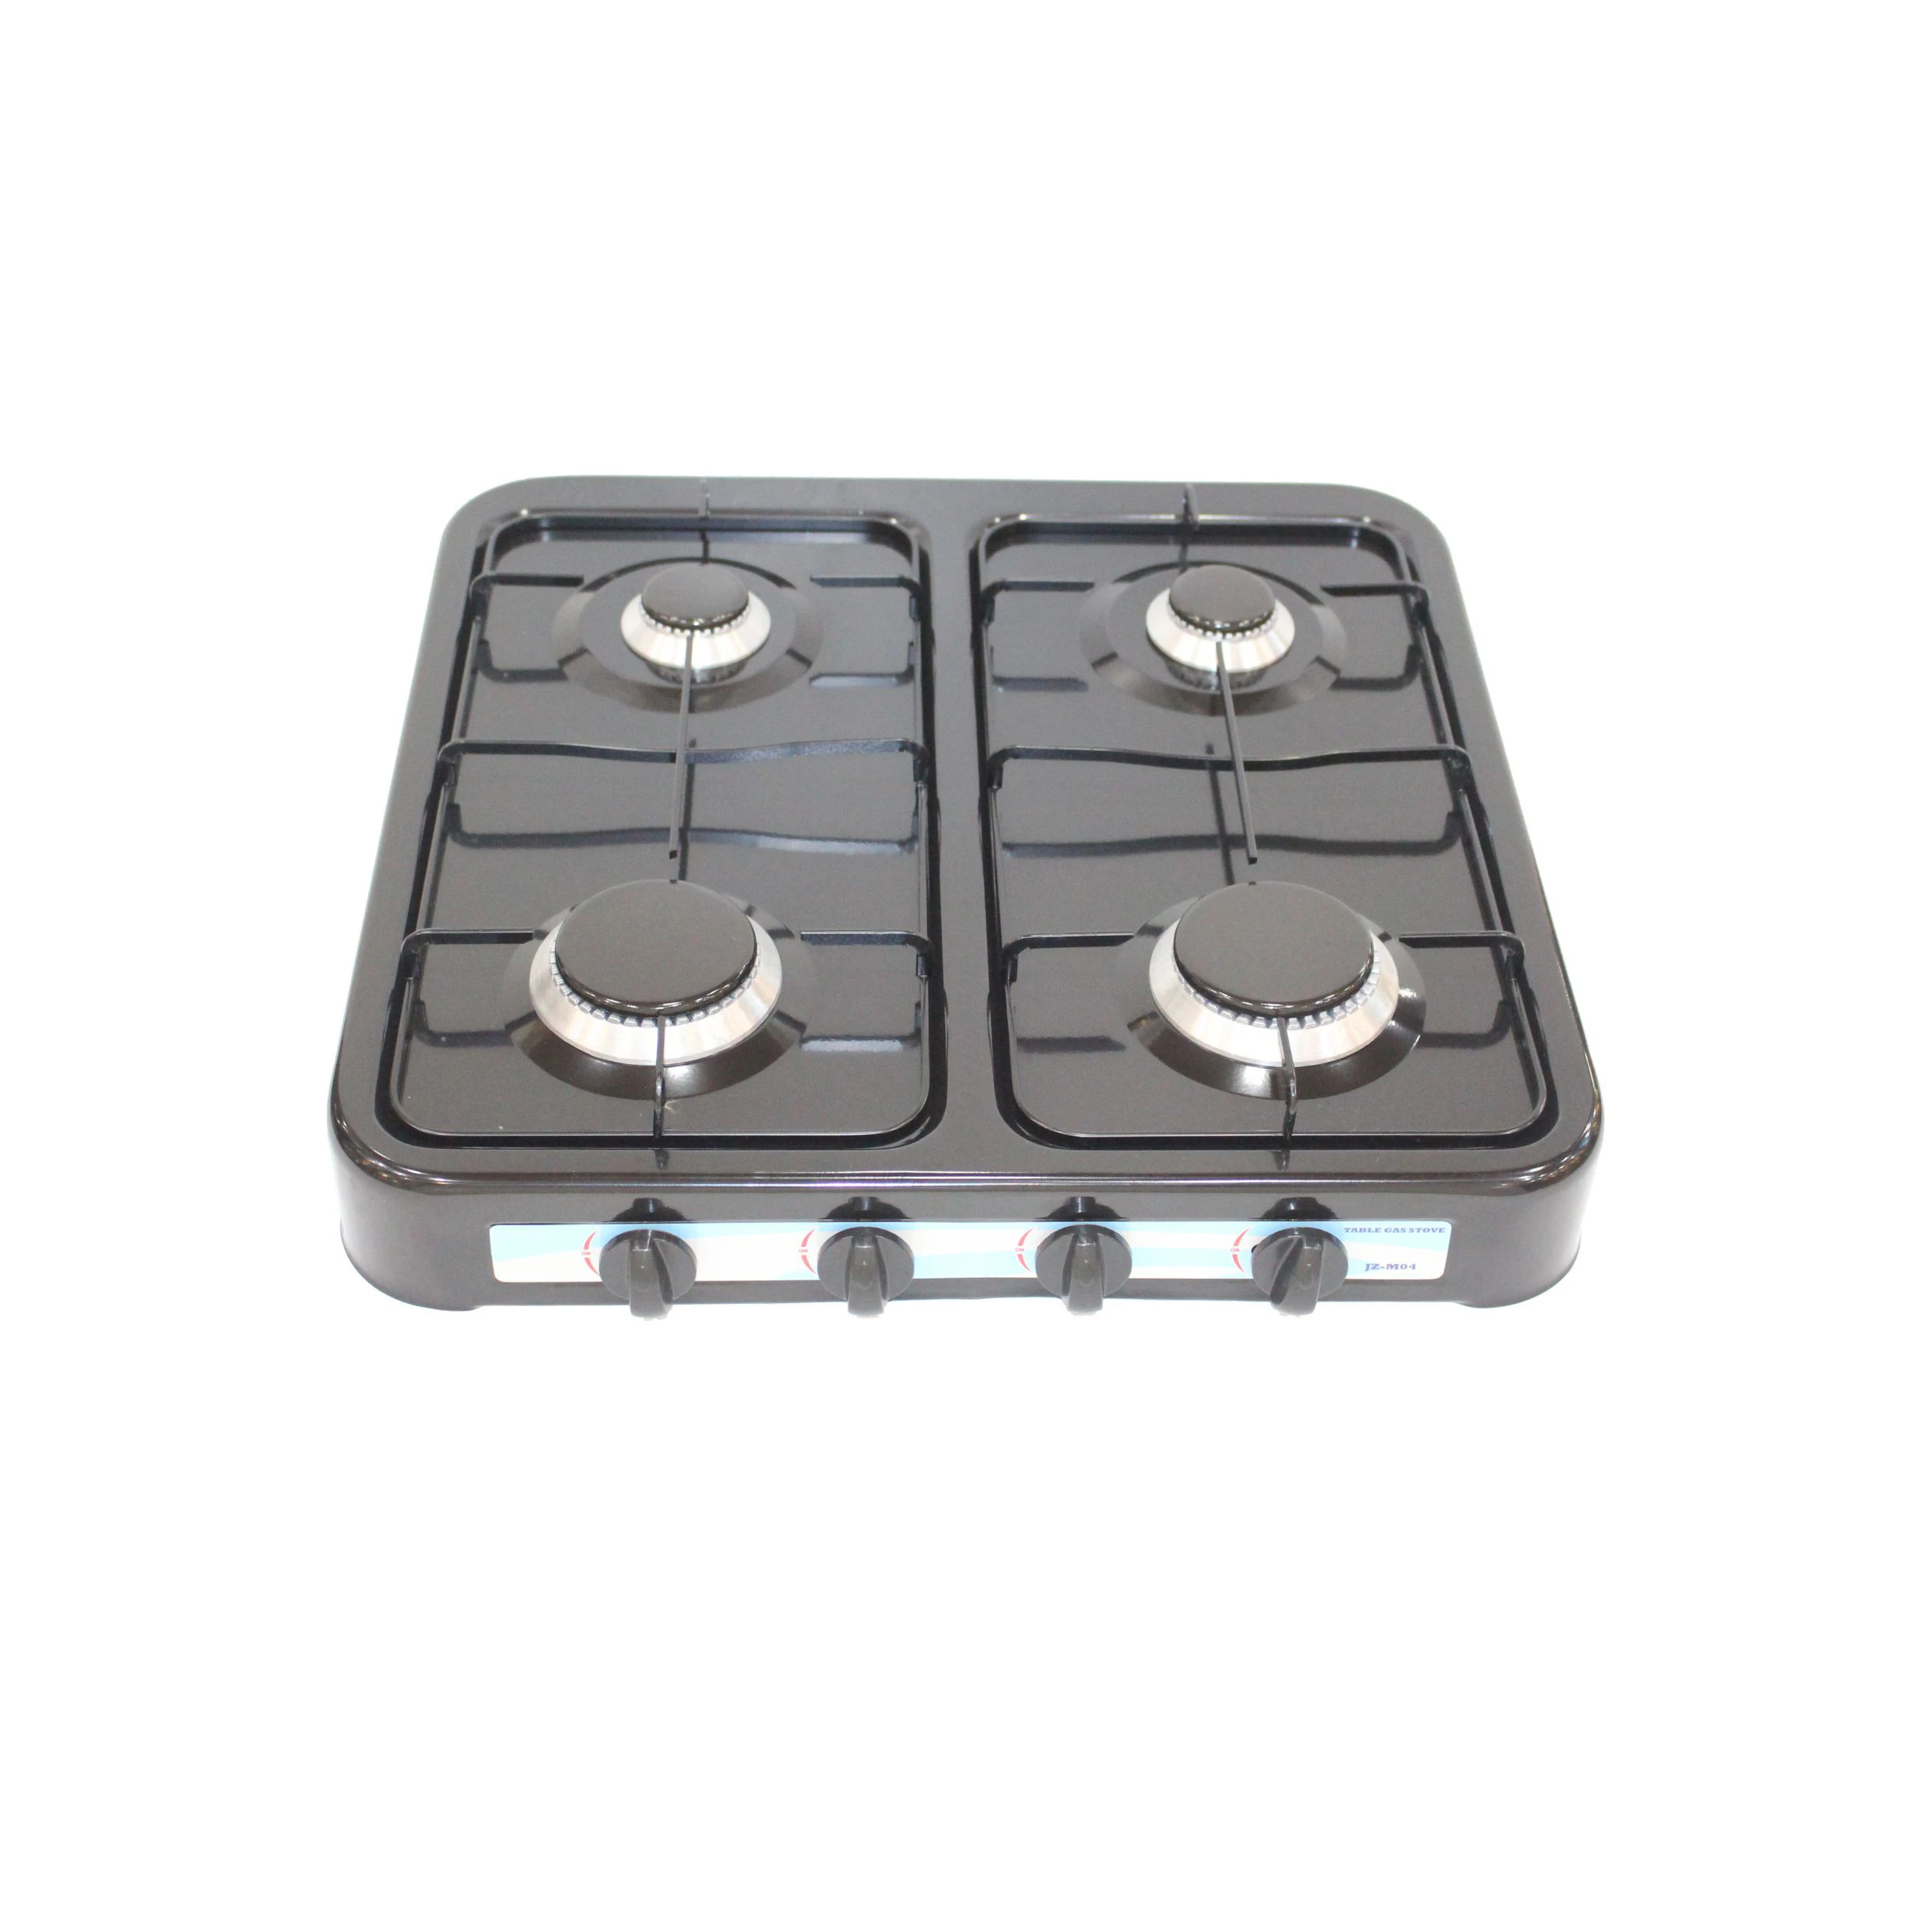 Euro style 4 burners electric ignition portable gas stove with cooktop cover